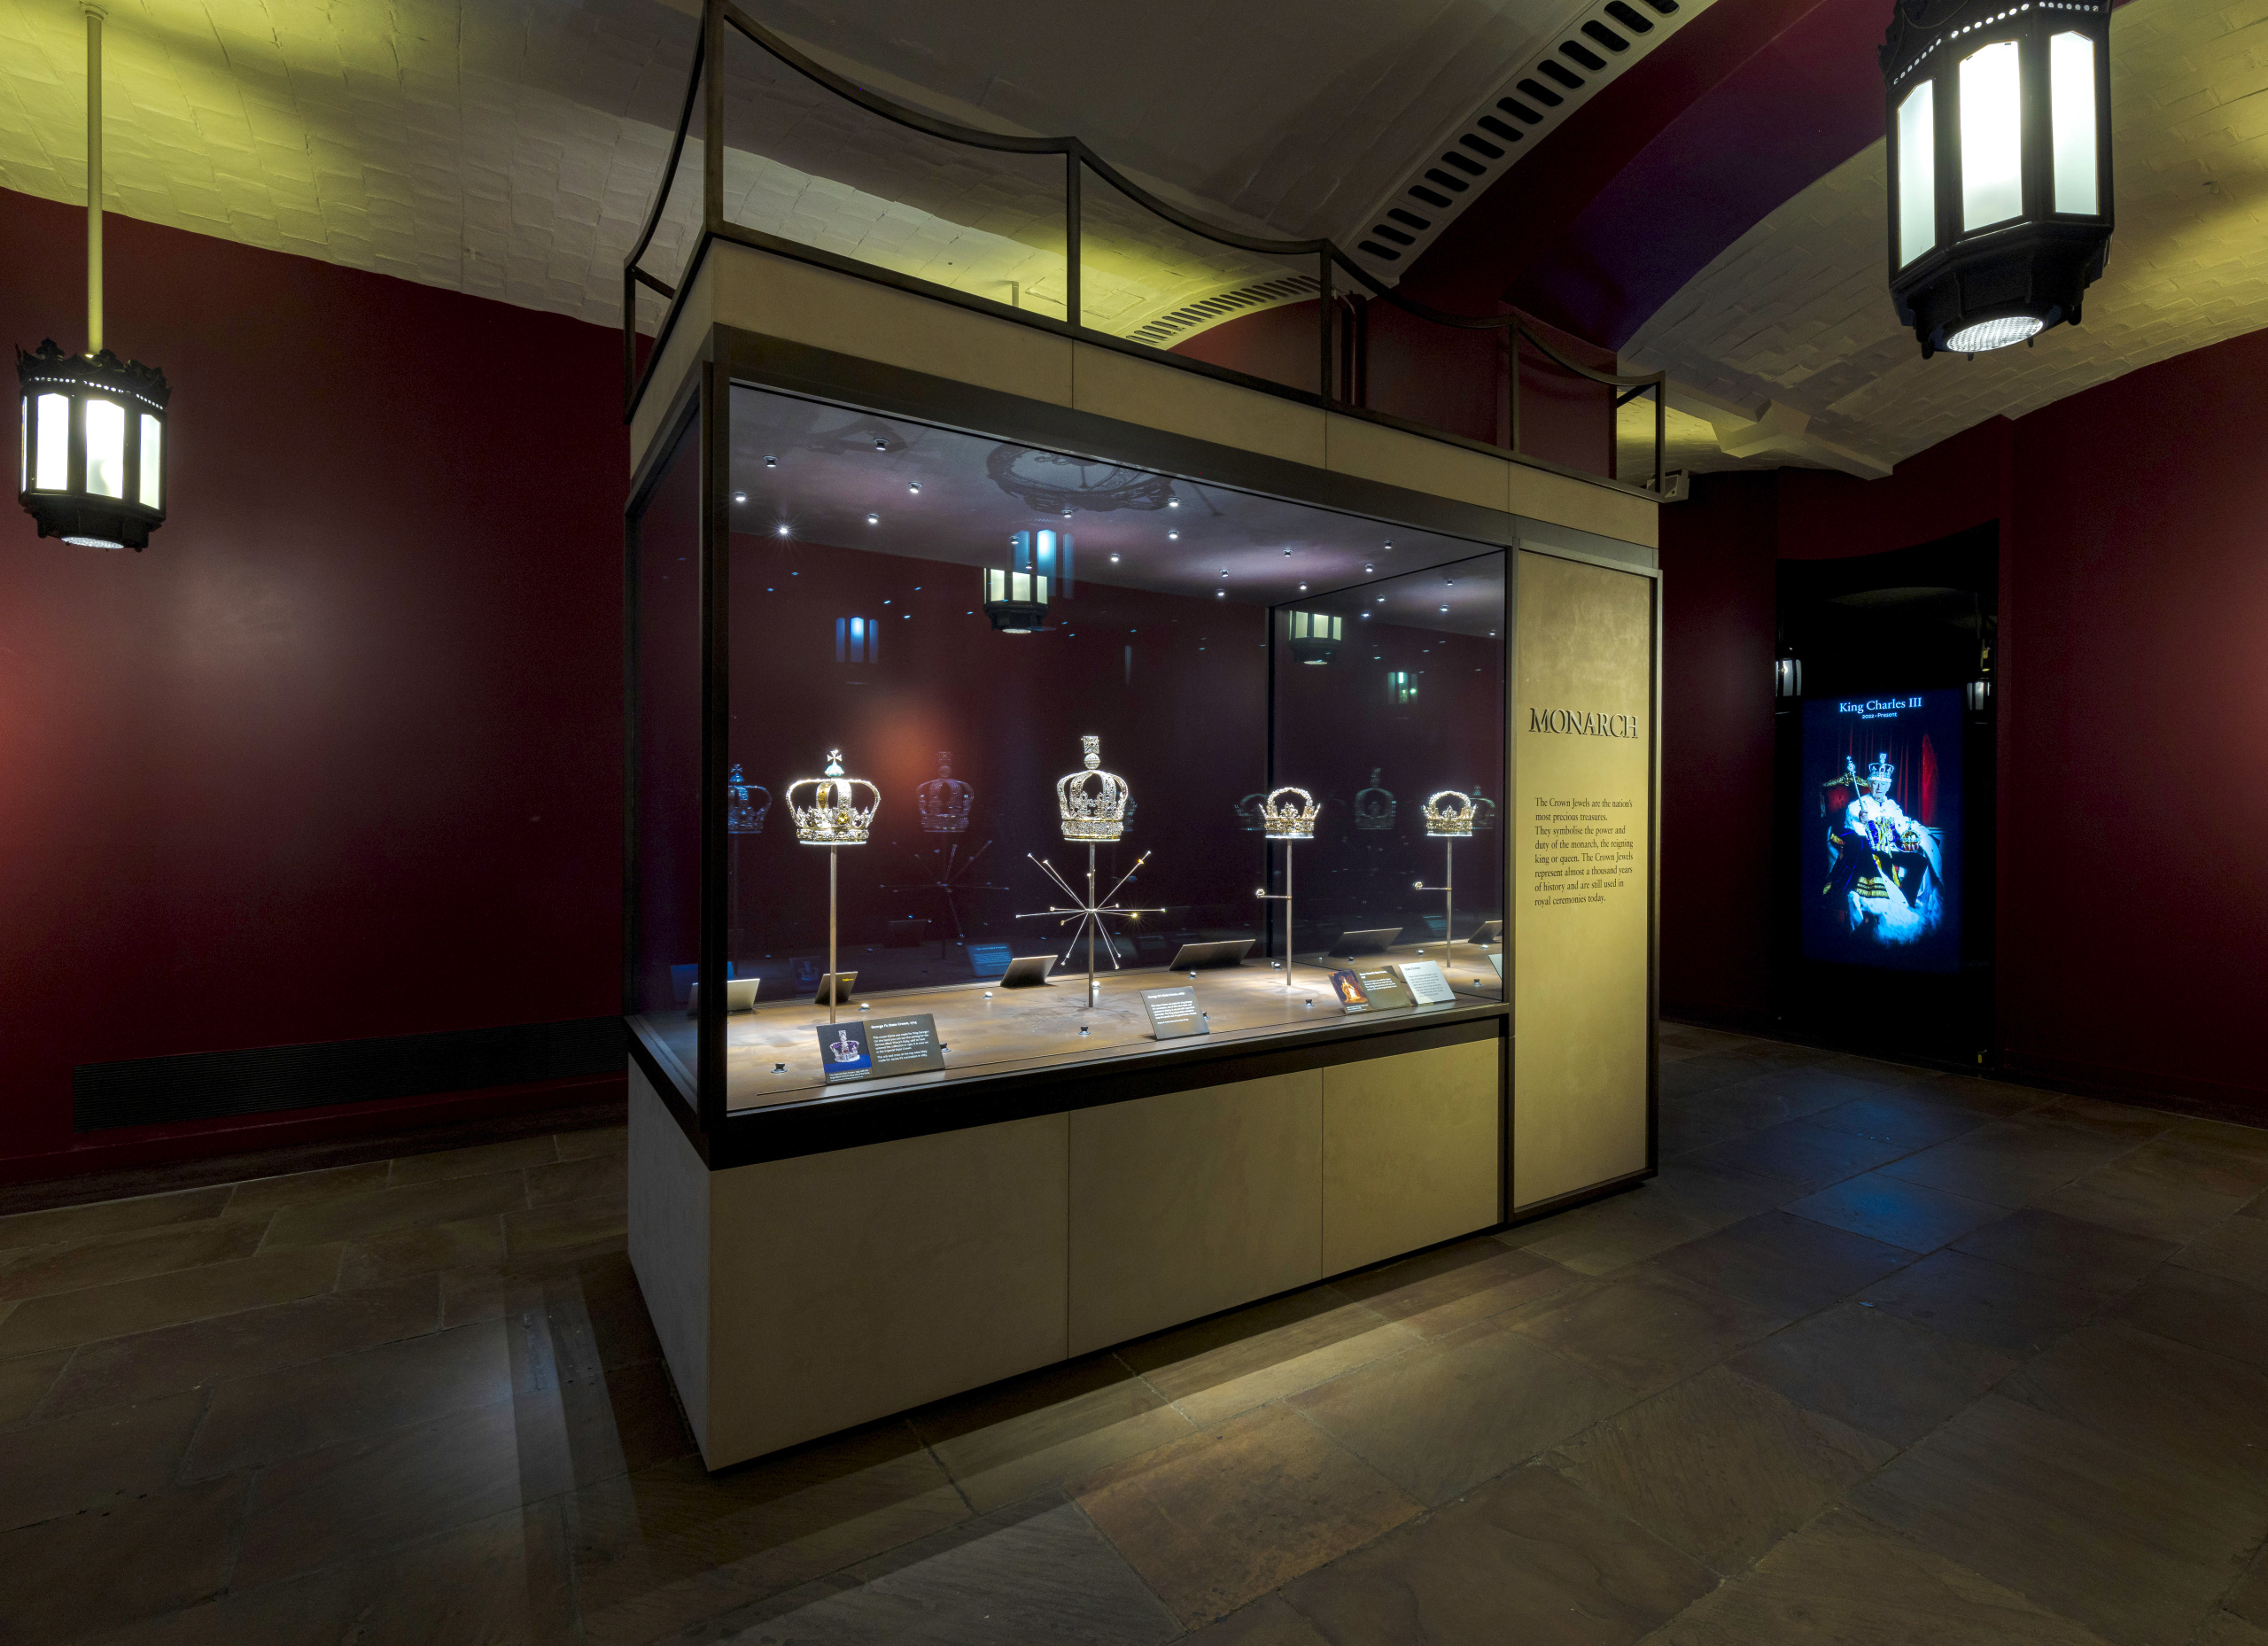 Jewel House exhibition at the Tower of London